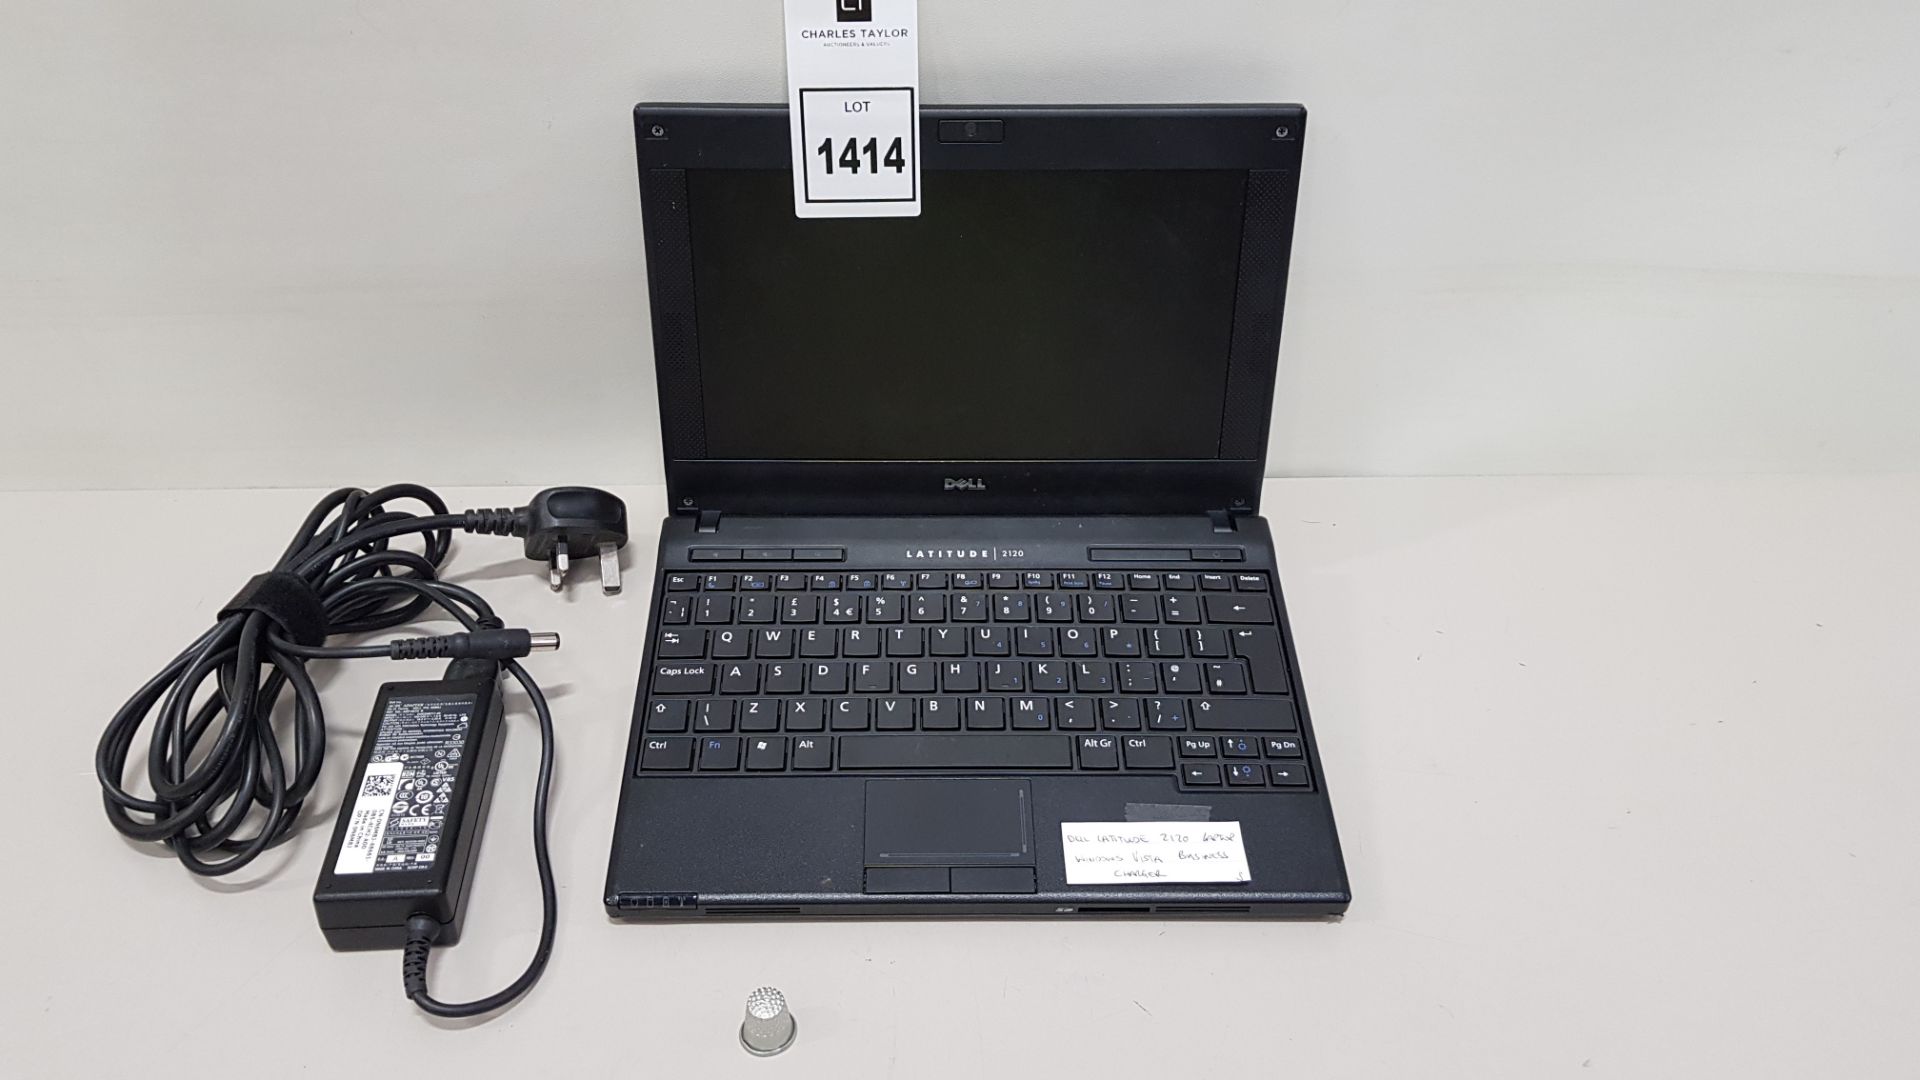 DELL LATITUDE 2120 LAPTOP WINDOWS VISTA BUSINESS - WITH CHARGER